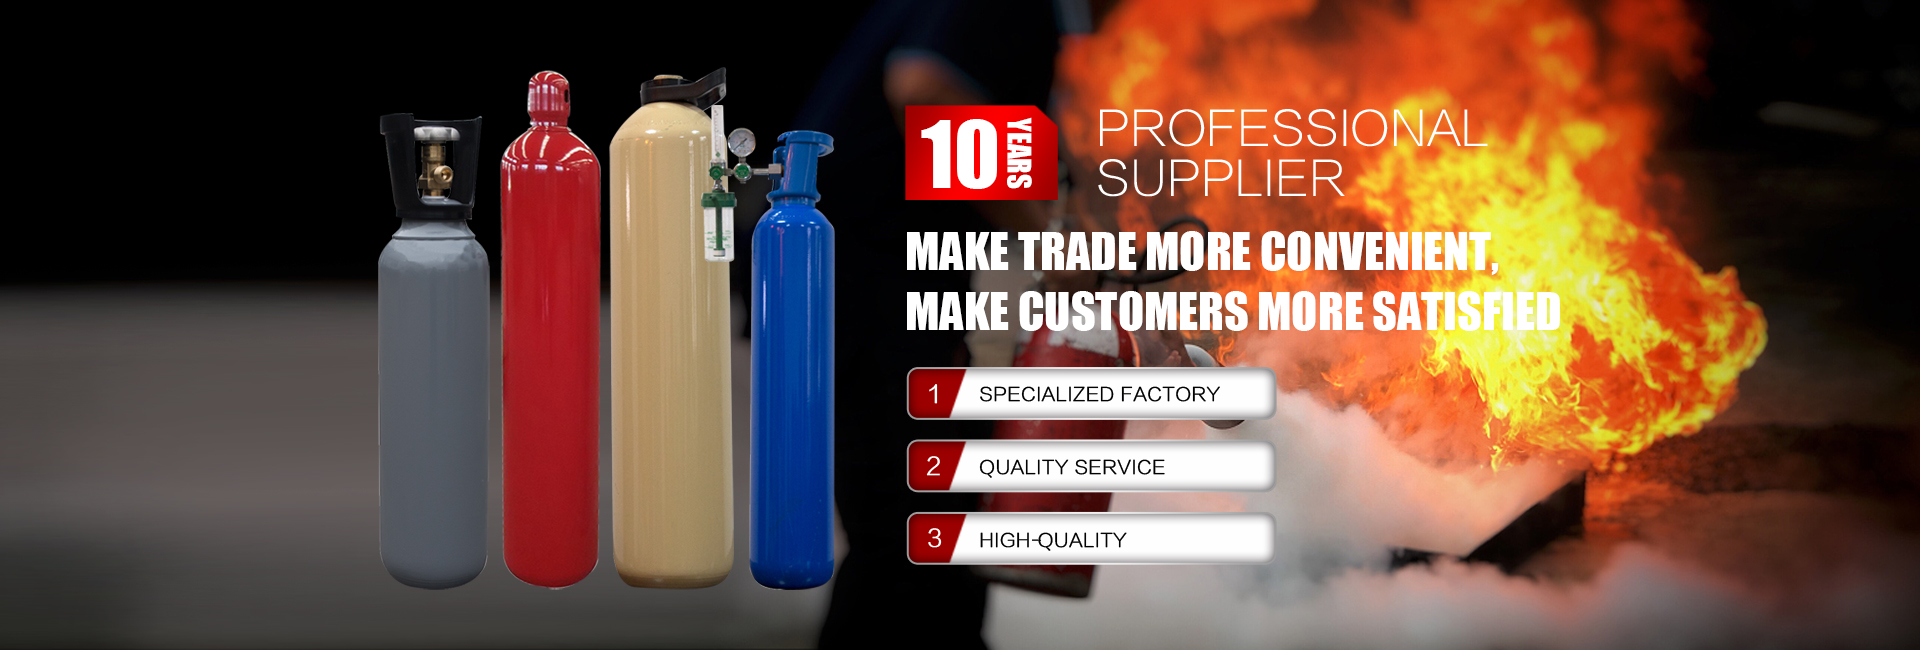 10 Years Professional Supplier